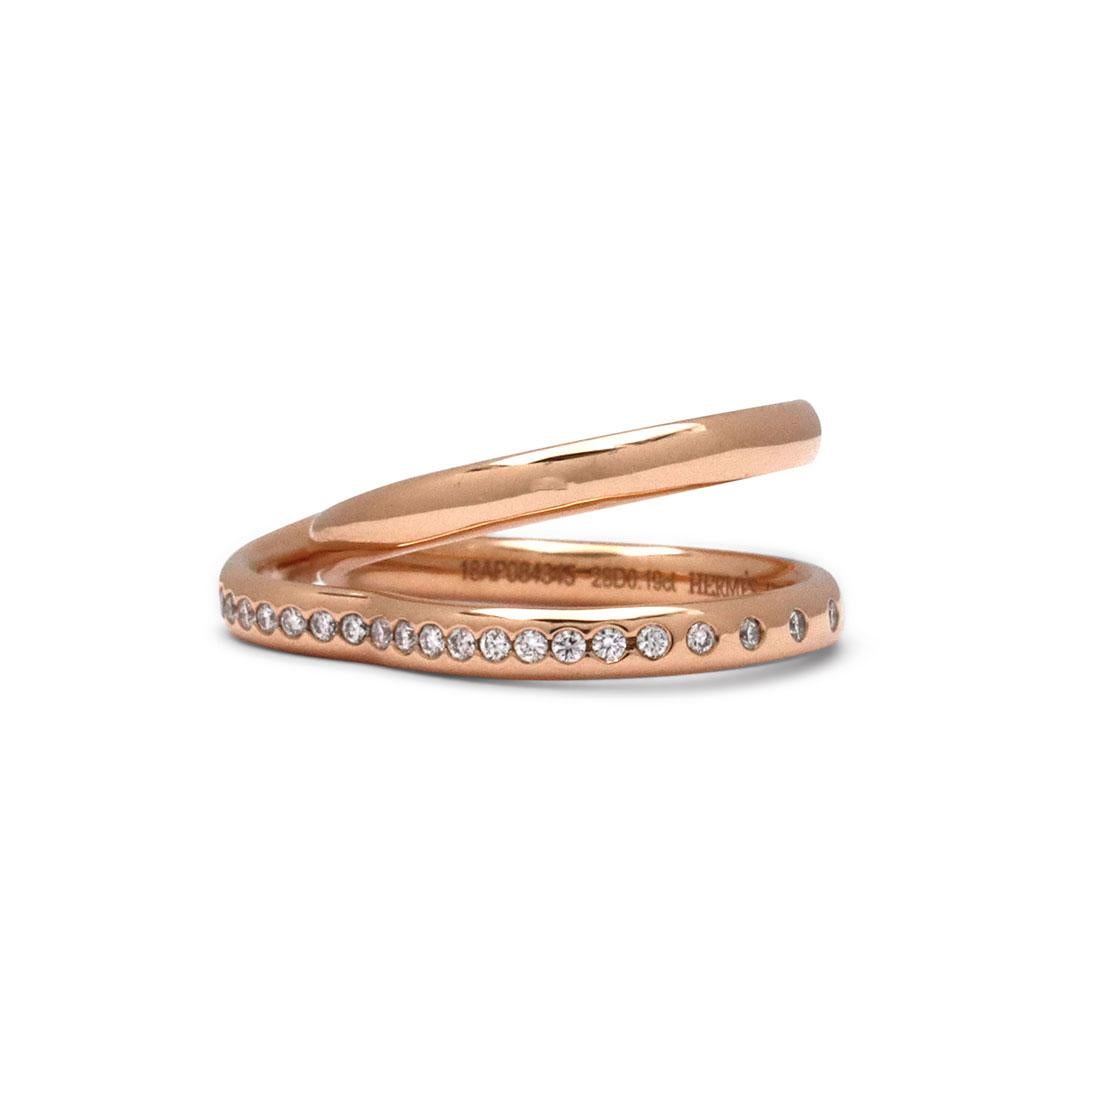 Authentic Hermes Vertige Coeur ring crafted in 18 karat rose gold and designed in the shape of a double ring. The second ring is heart-shaped and is set with round brilliant cut diamonds with an estimated total carat weight of 0.19. Signed Hermes,